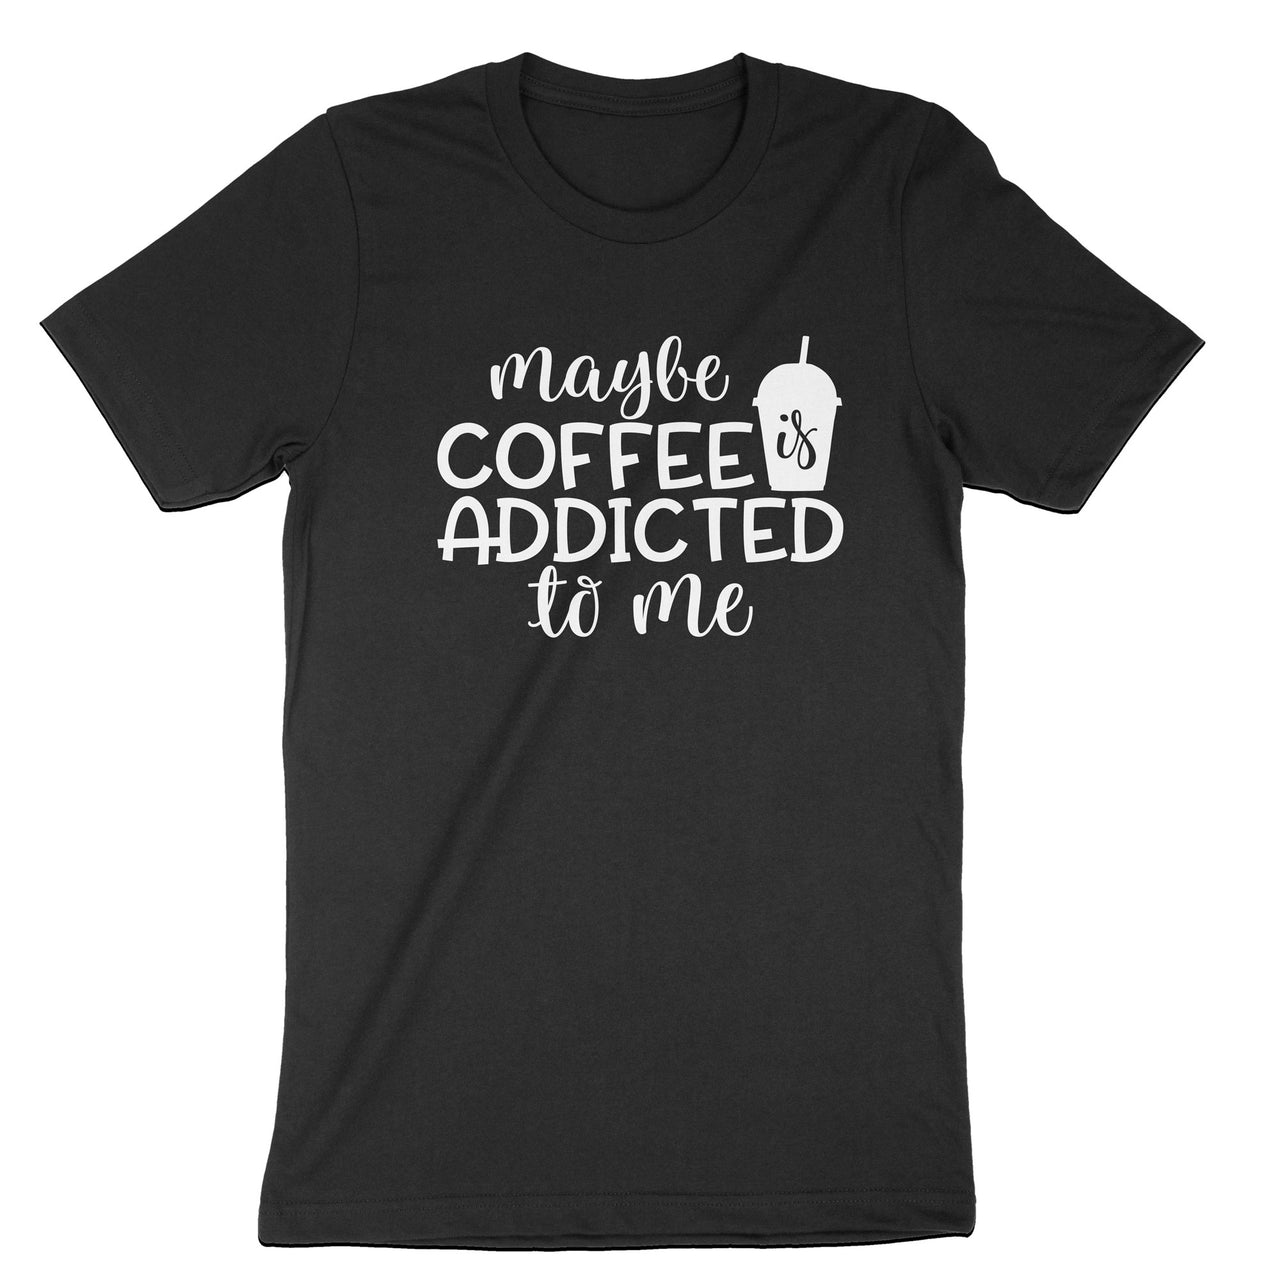 Maybe Coffee is Addicted to Me T-Shirt, Funny Coffee Lover Tee Shirt